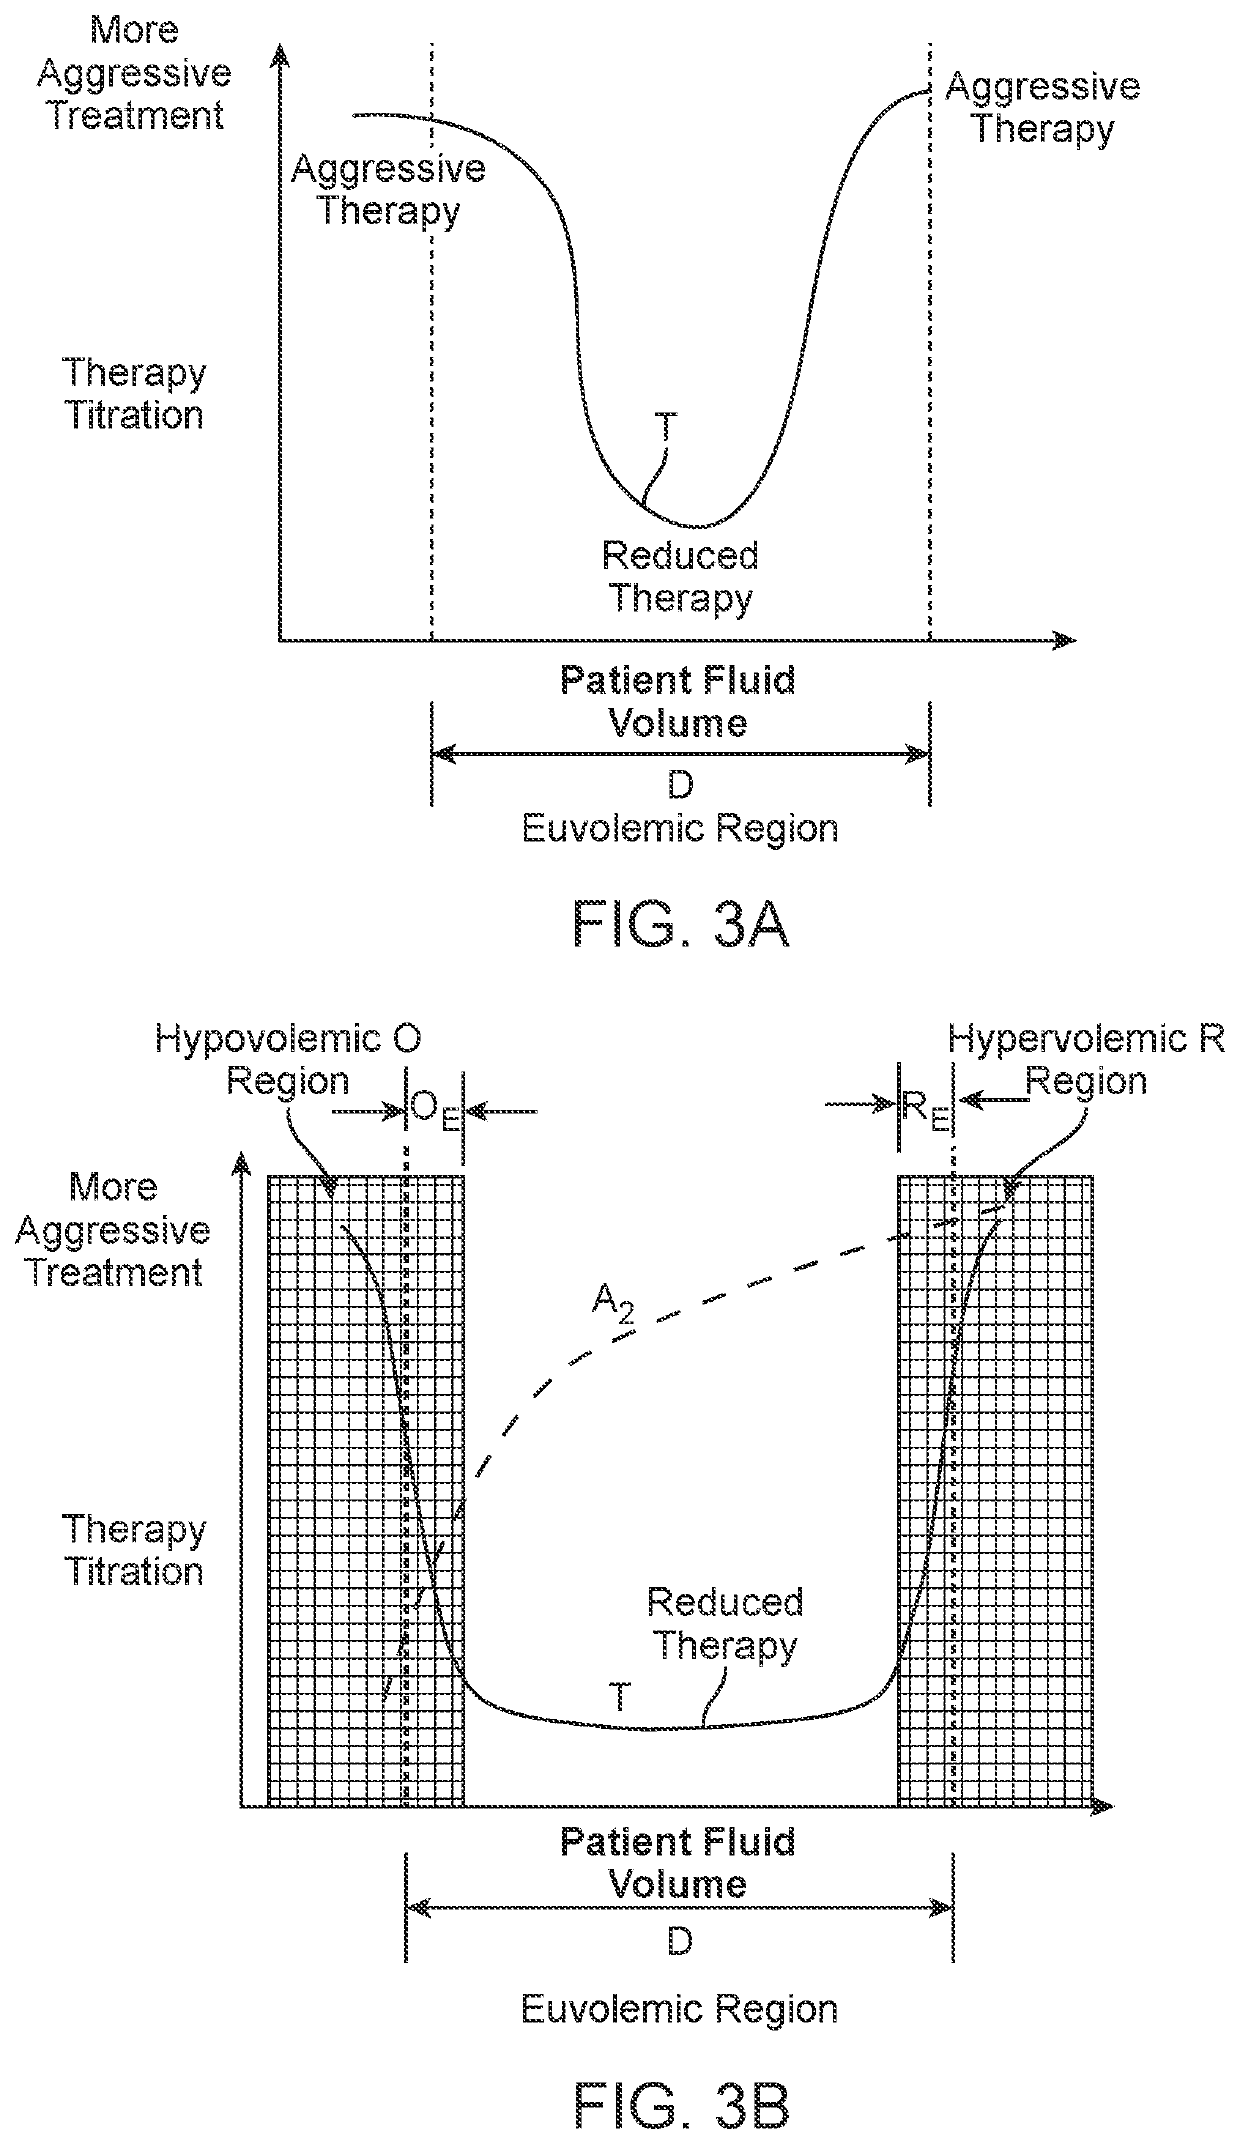 Systems and Methods for Self-Directed Patient Fluid Management